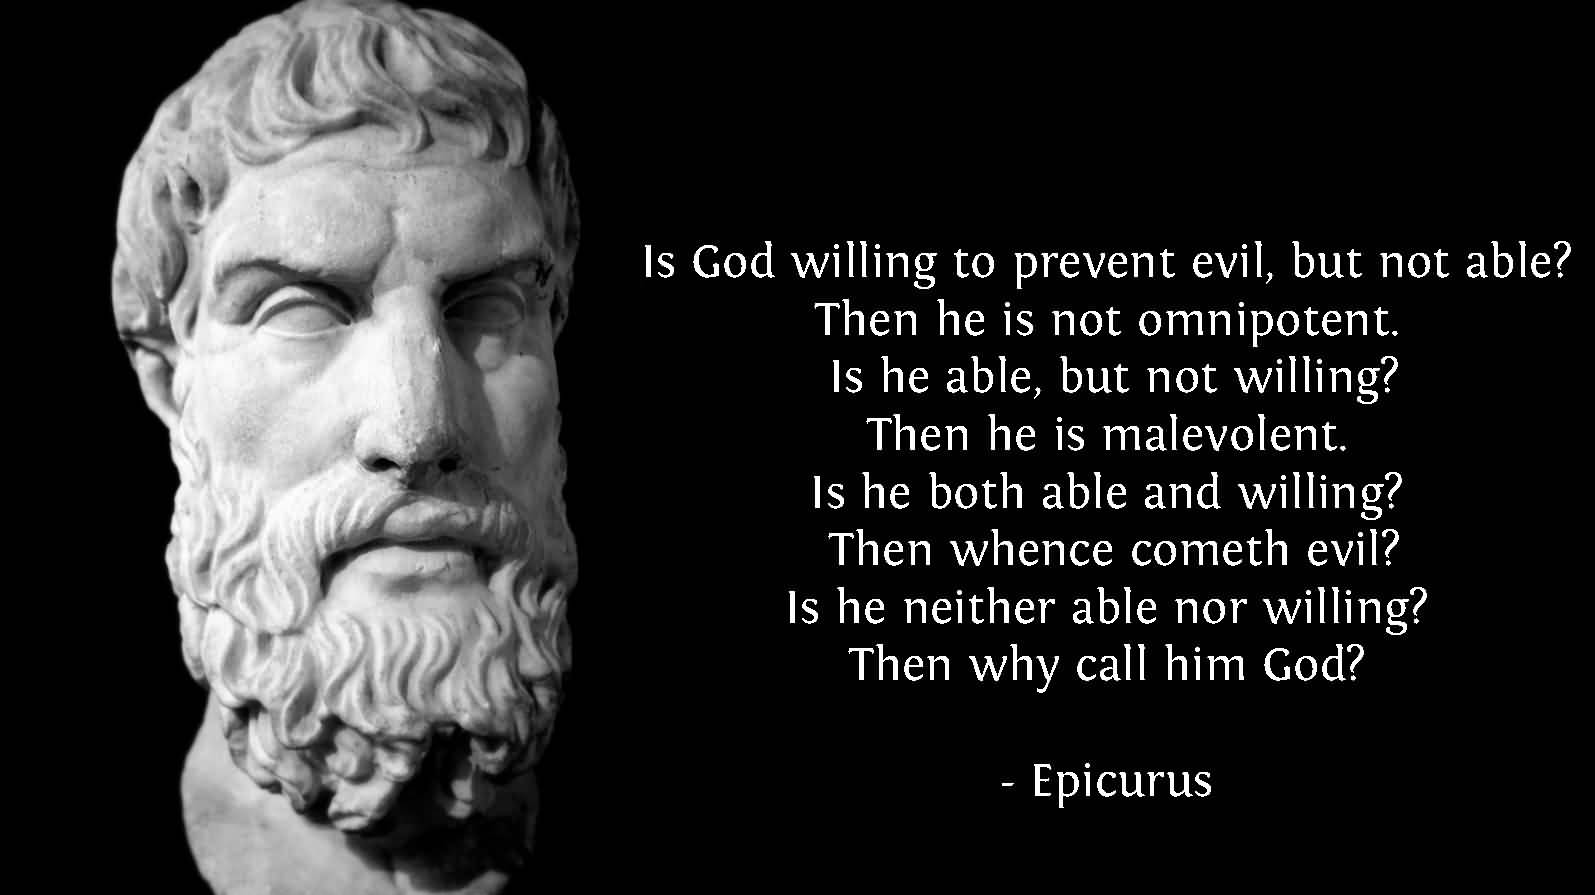 Is God willing to prevent evil, but not able1 Then he is not omnipotent. Is he able, but not willing1 Then he is malevolent. Is he both able and willing1 Then ... Epicurus